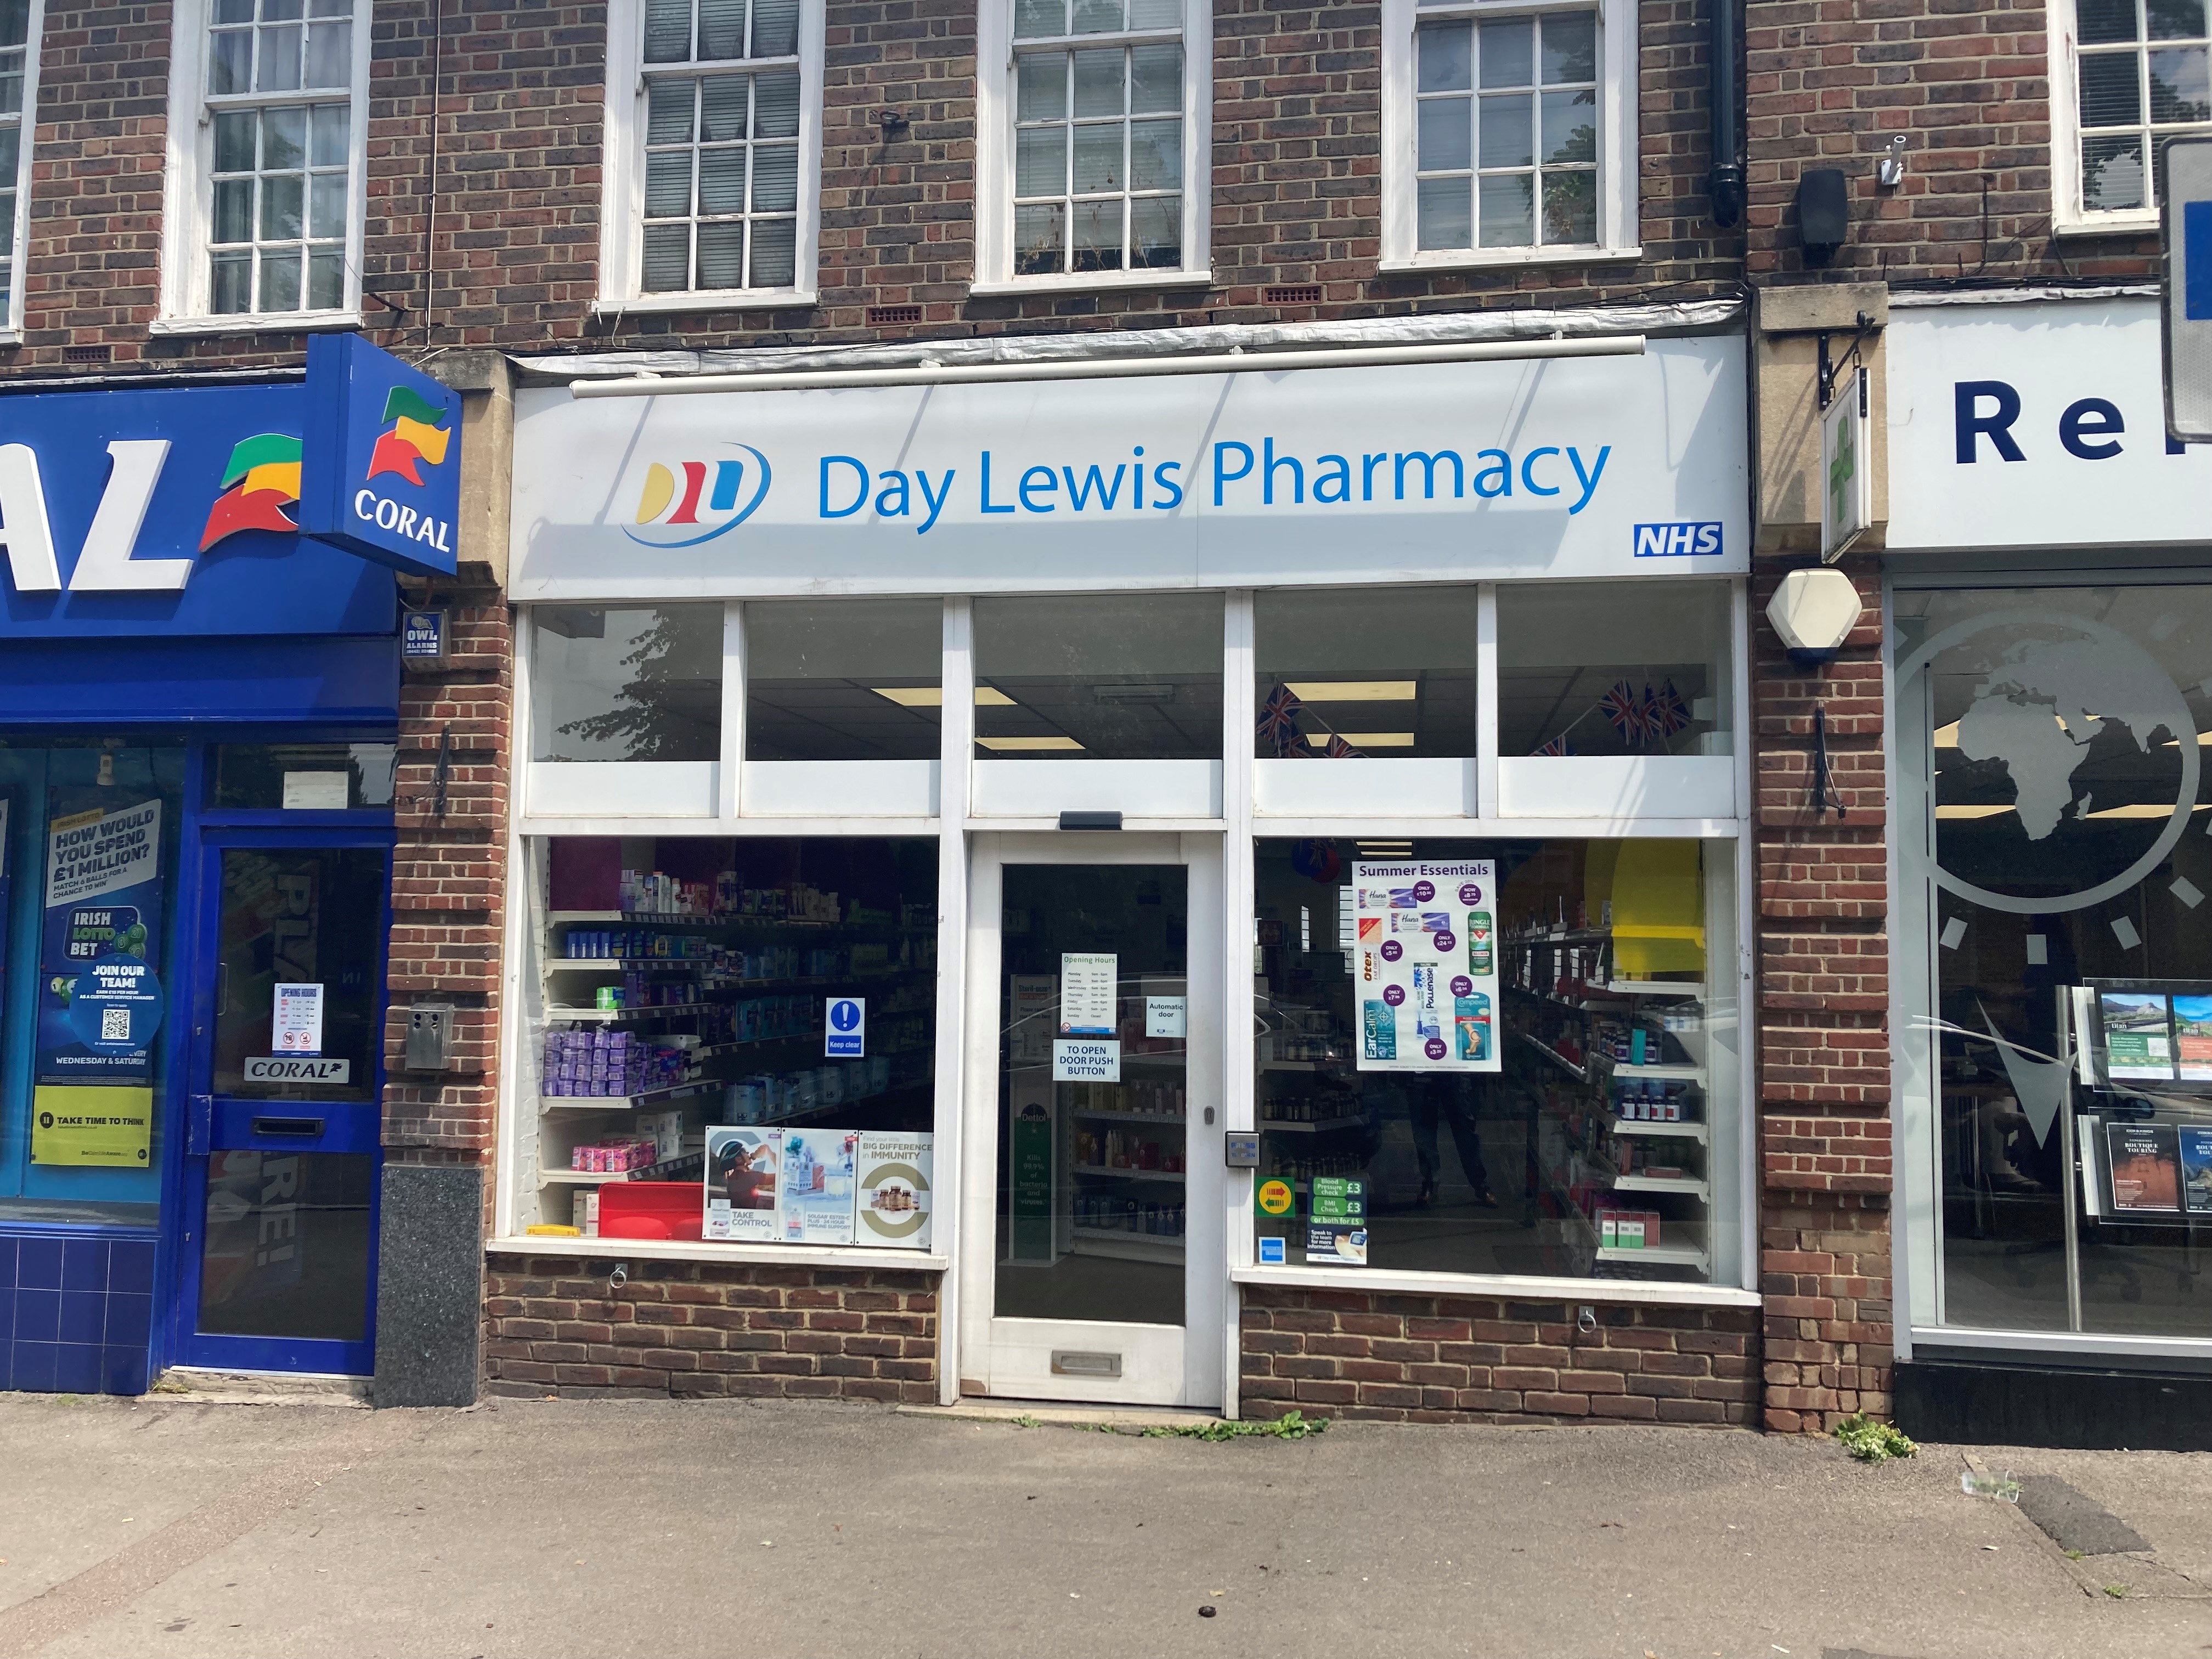 Day Lewis Pharmacy Reigate Travel & Ear Micro-Suction Clinic Reigate 01737 243484